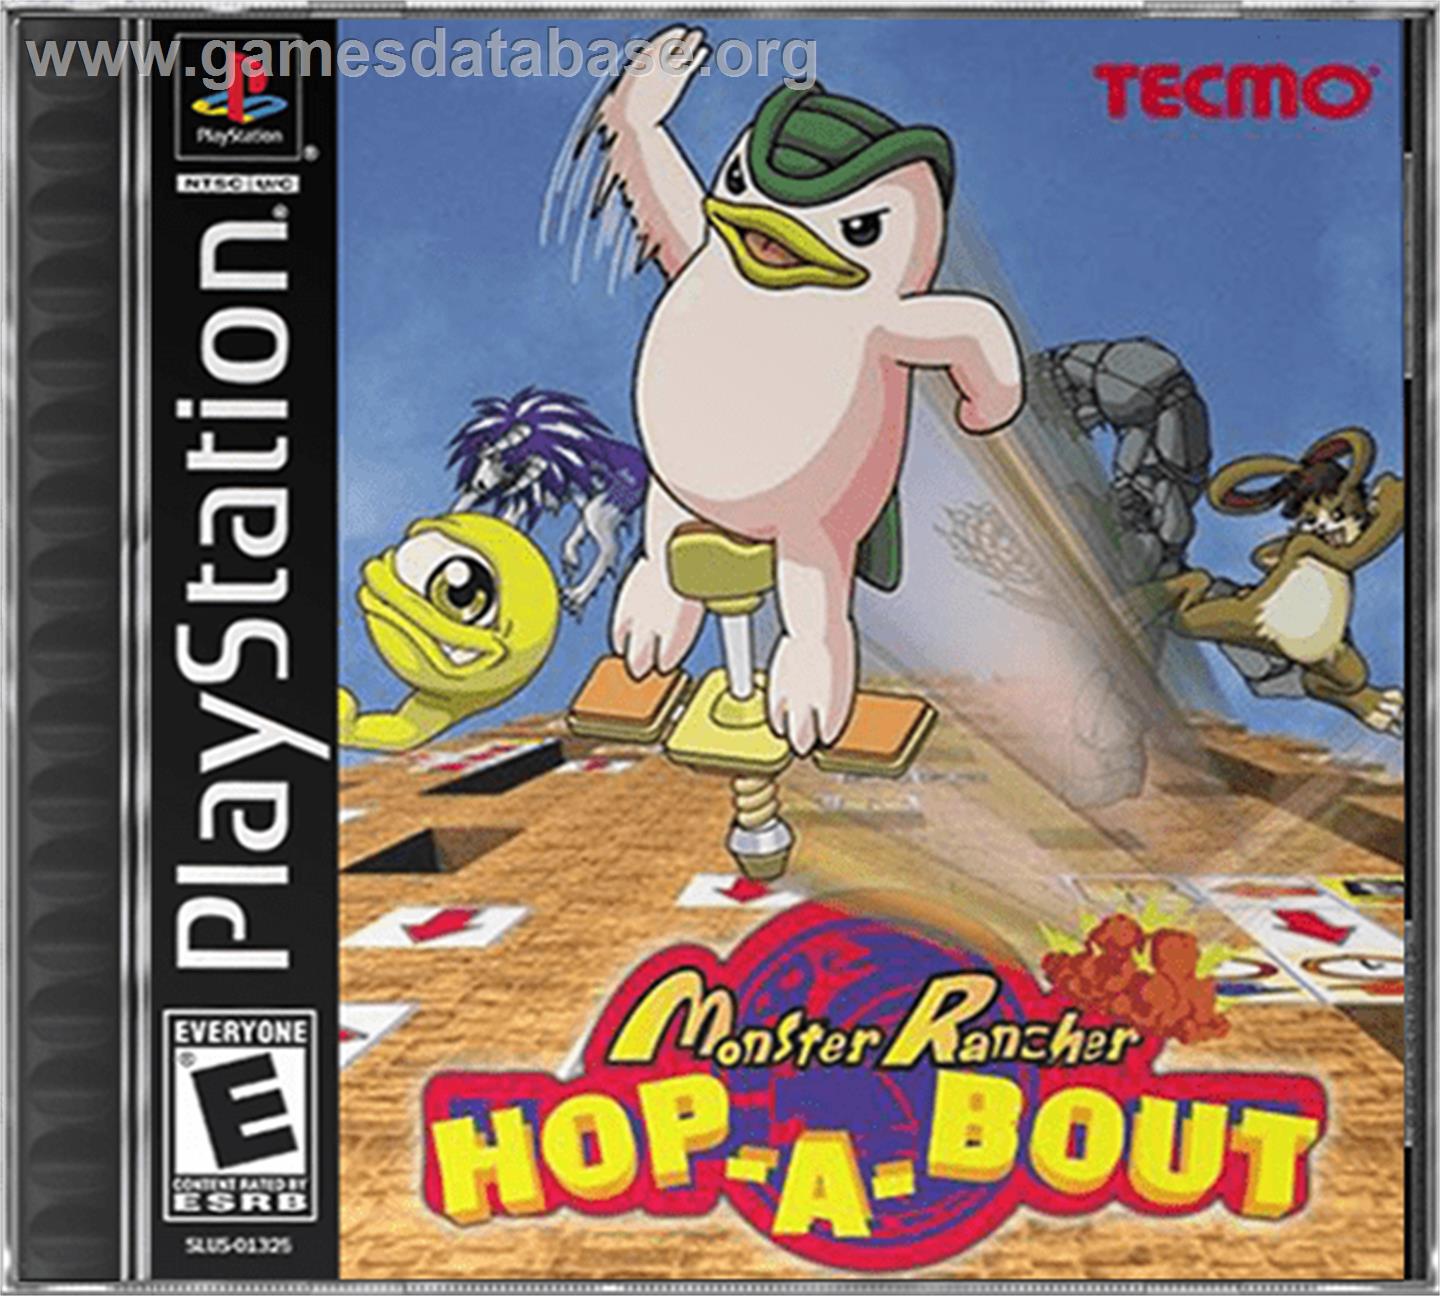 Monster Rancher Hop-A-Bout - Sony Playstation - Artwork - Box